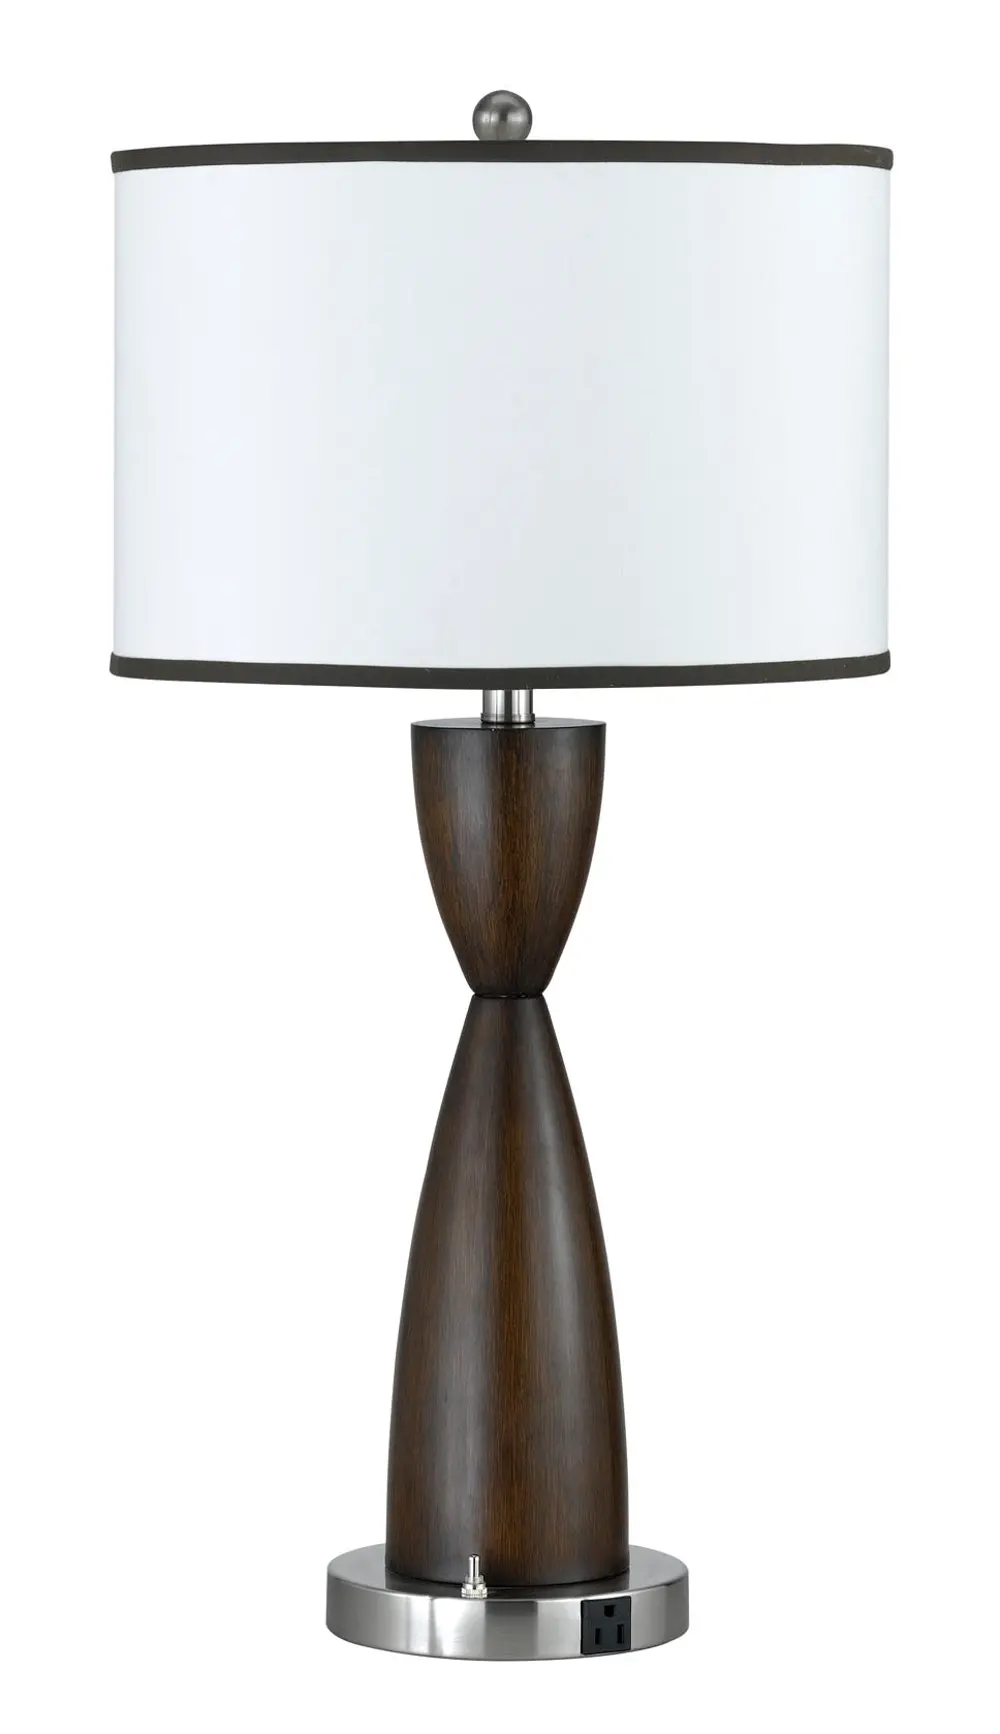 Metal Table Lamp with 1 Built-In Power Outlet-1